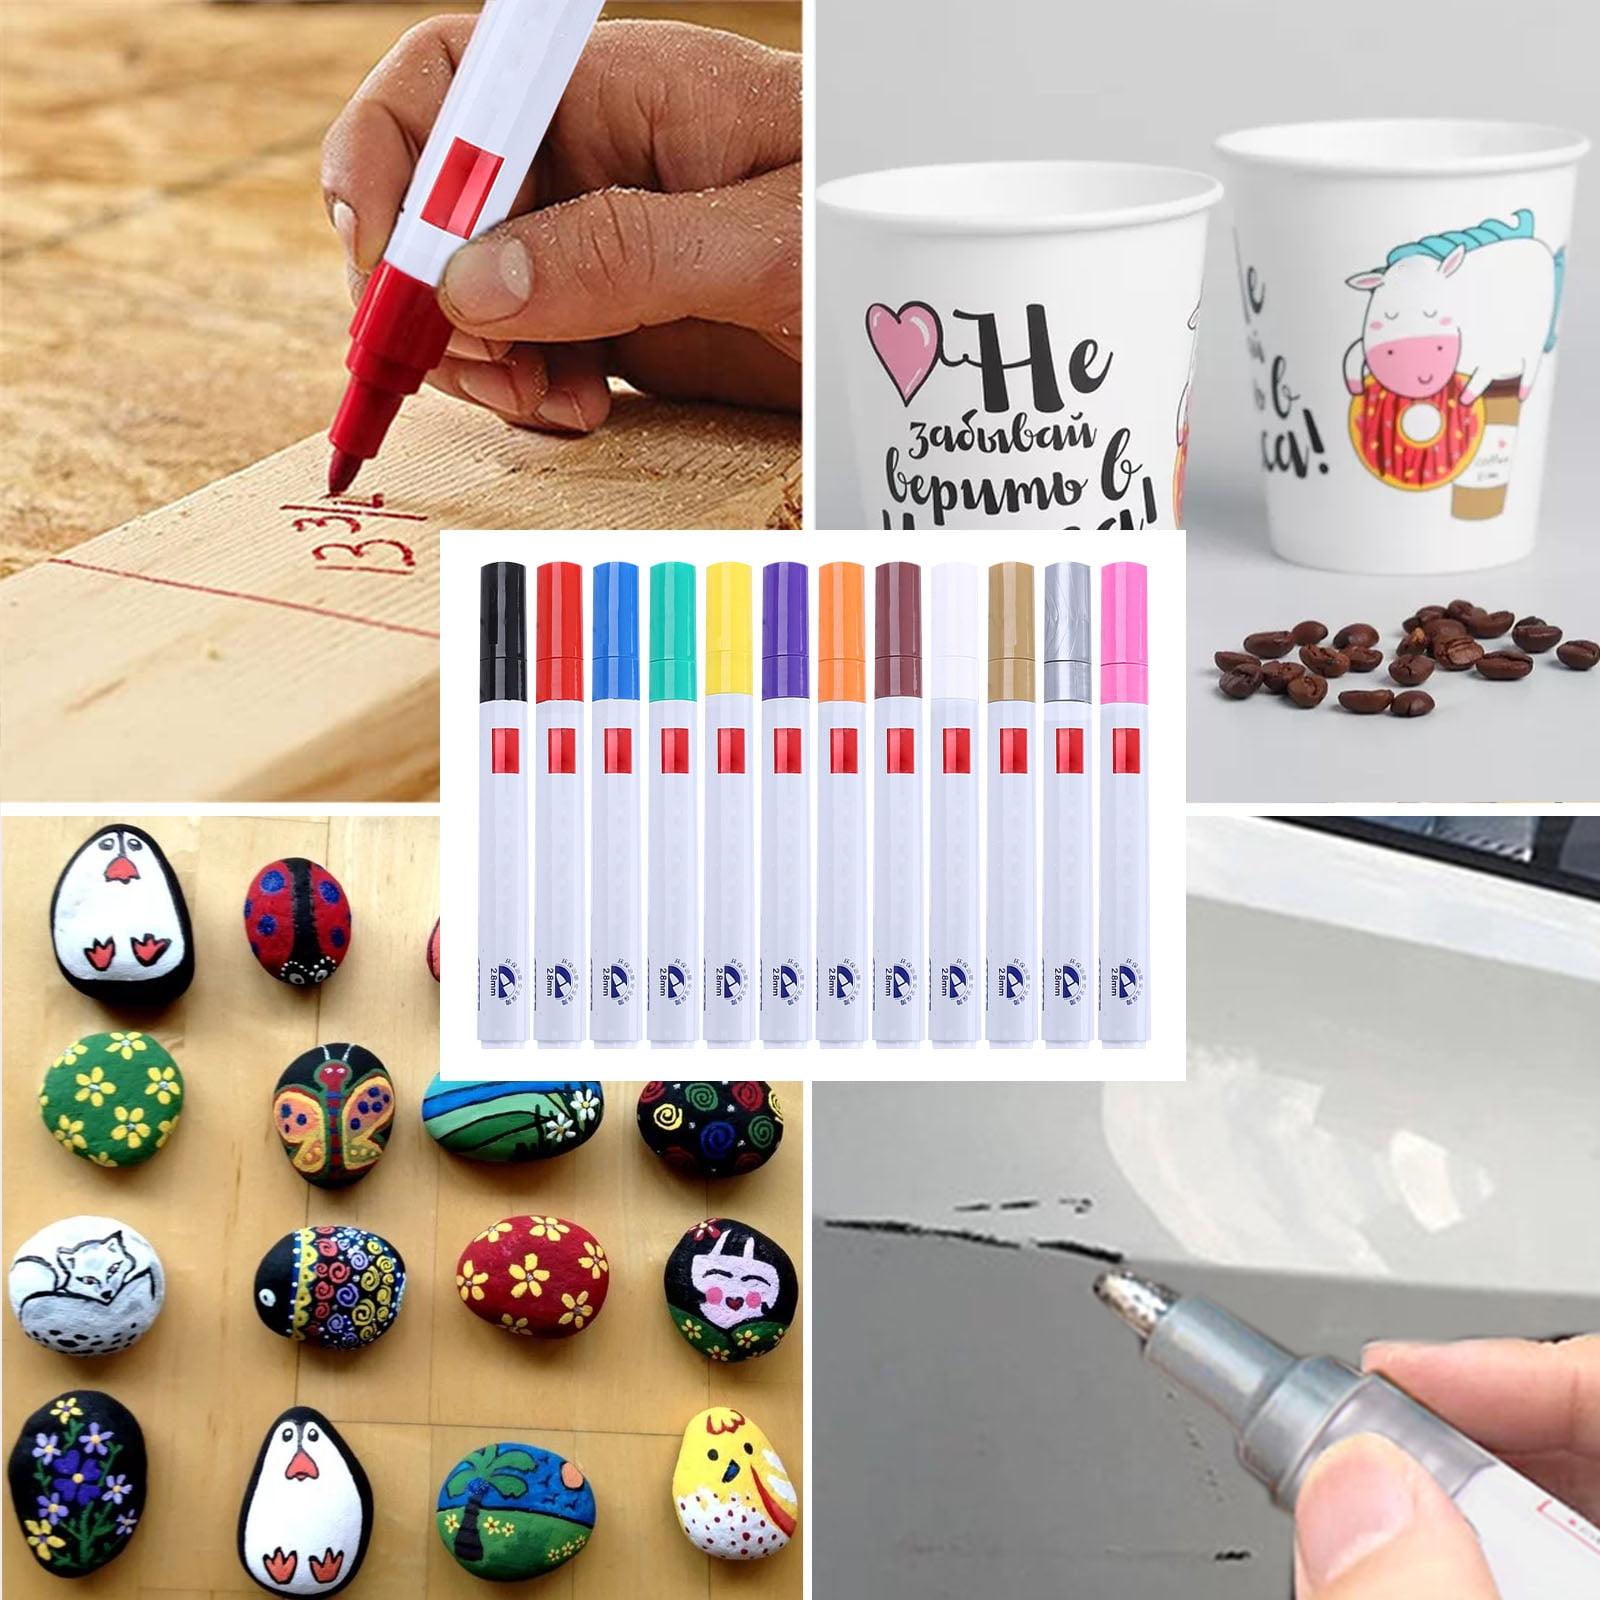 Artistro 15 Oil Based Paint Markers For Wood, Rock, Fabric, Glass -  Permanent, Quick Dry, Waterproof - Oil Paint Pens For Ceramic, Mugs, Metal,  Plast - Imported Products from USA - iBhejo